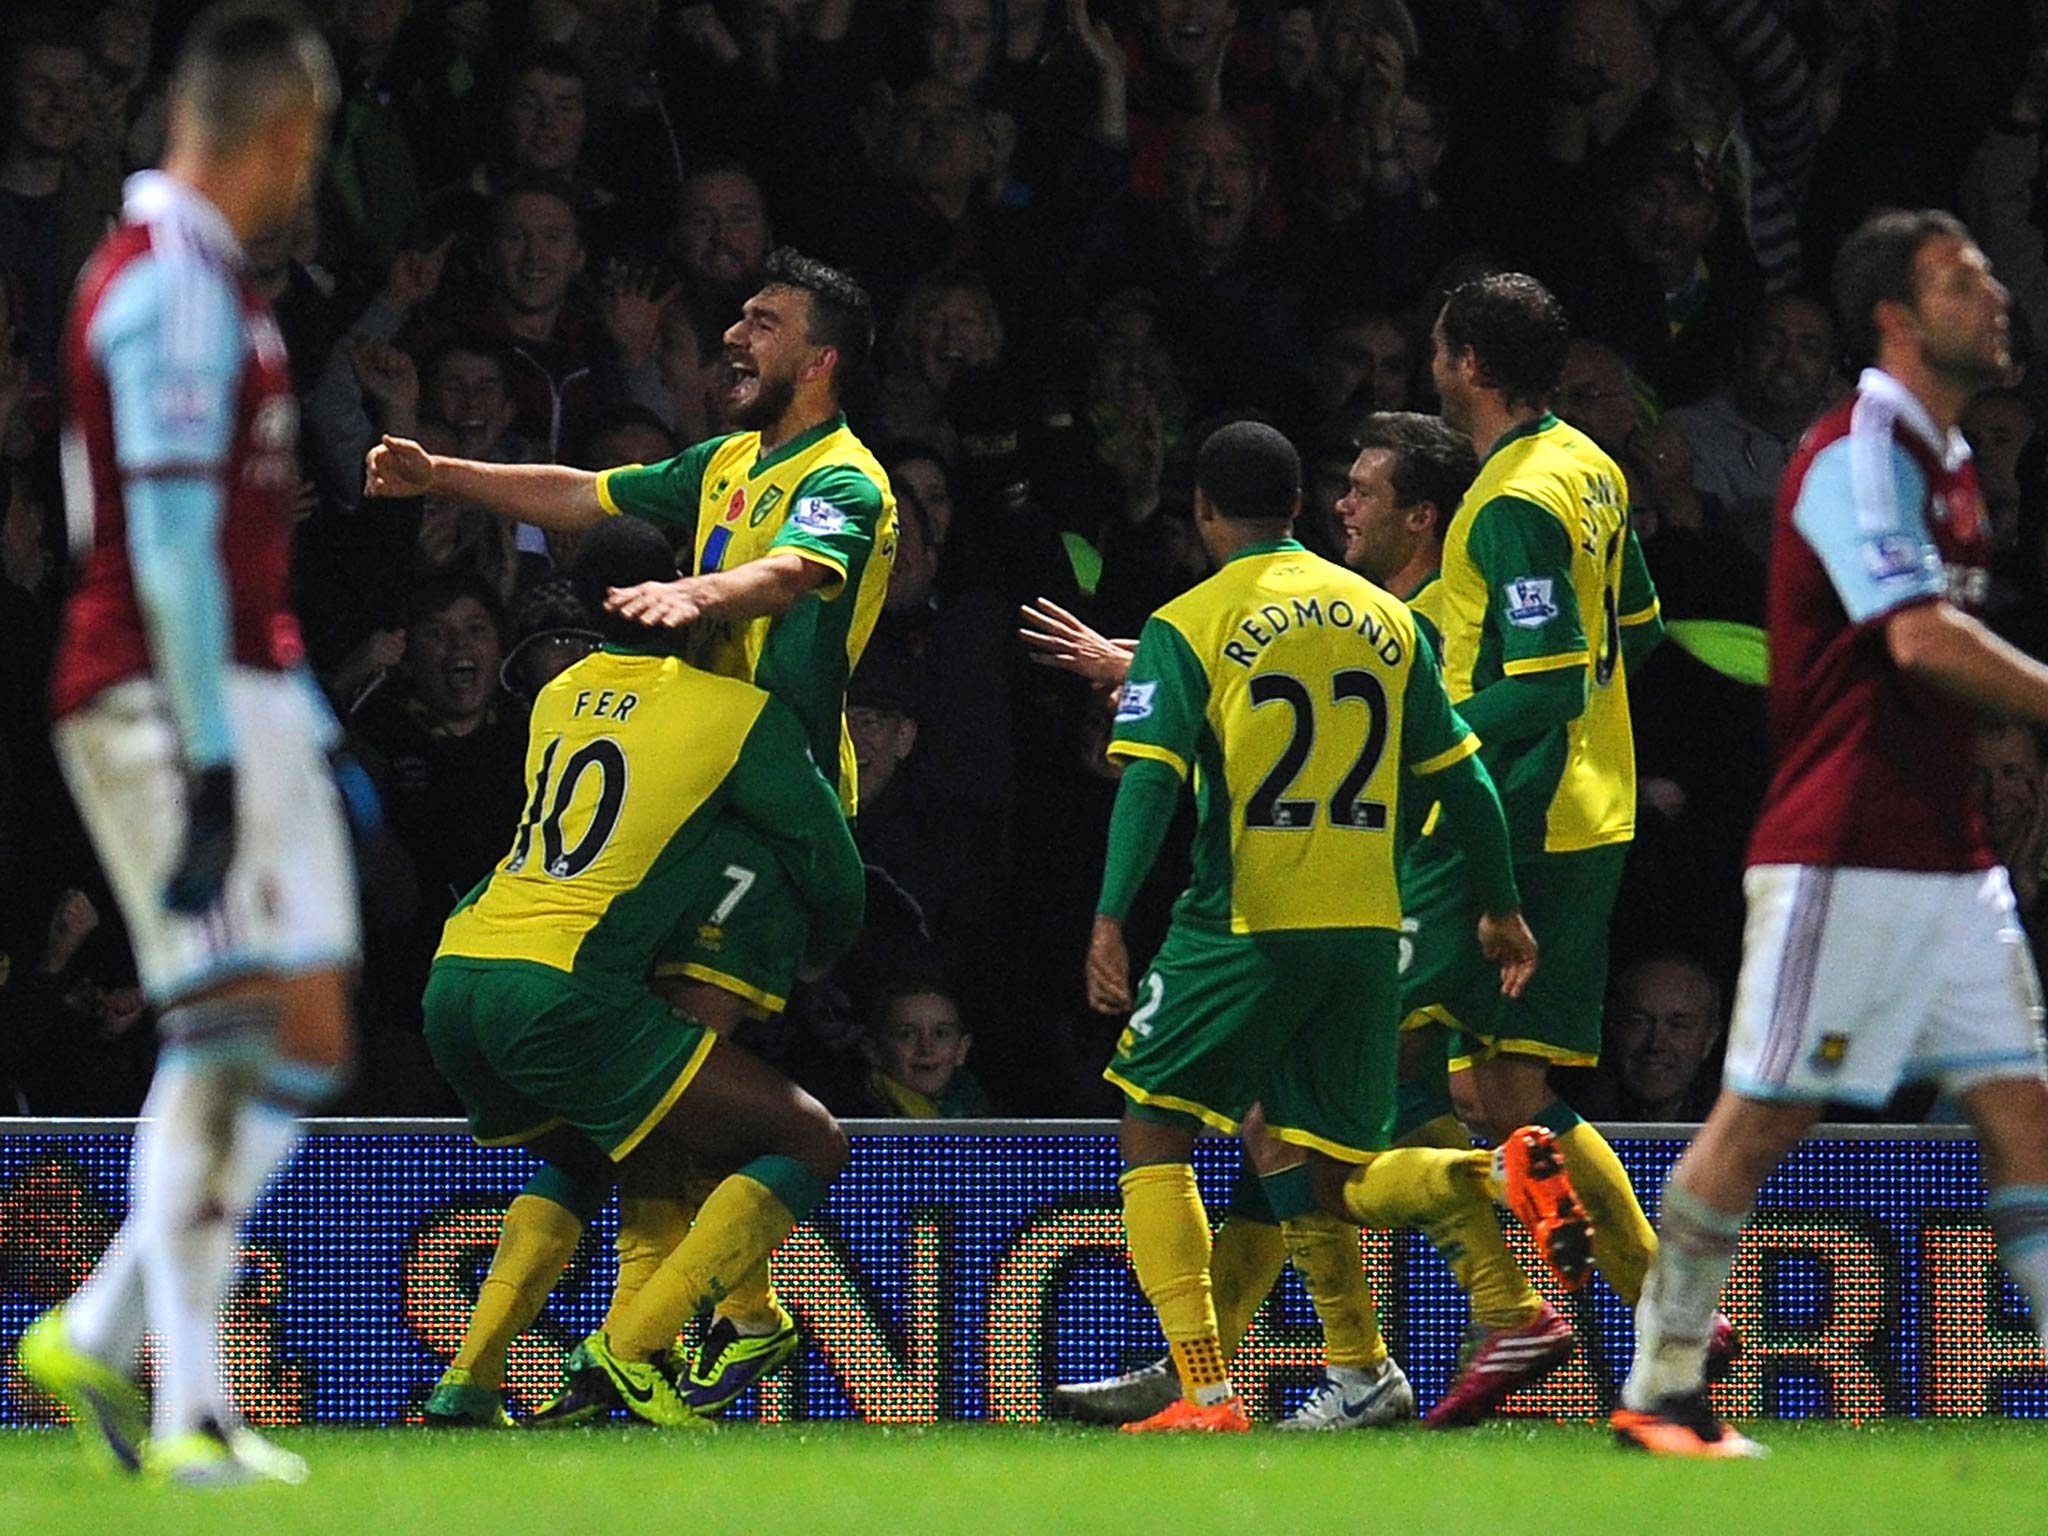 Robert Snodgrass of Norwich City celebrates his goal with Leroy Fer during the Barclays Premier League match between Norwich City and West Ham United at Carrow Road